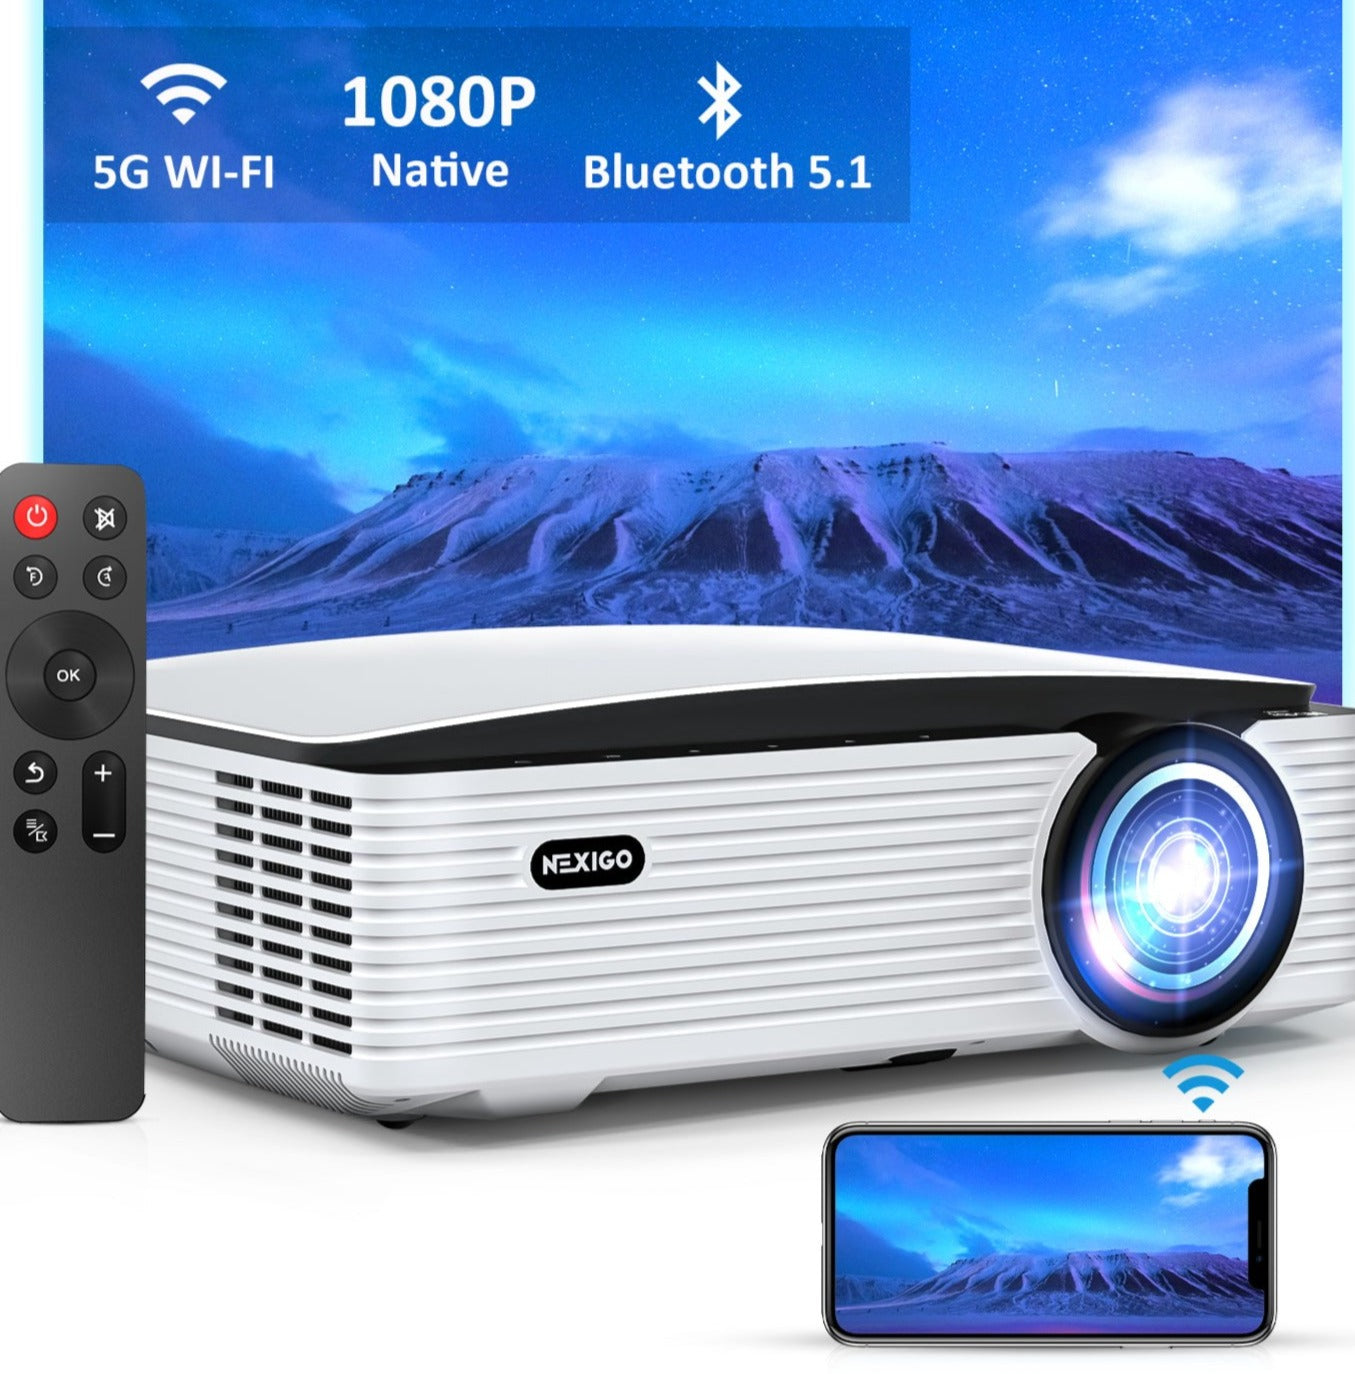 A 1080P projector with remote control and support for mobile screen casting.